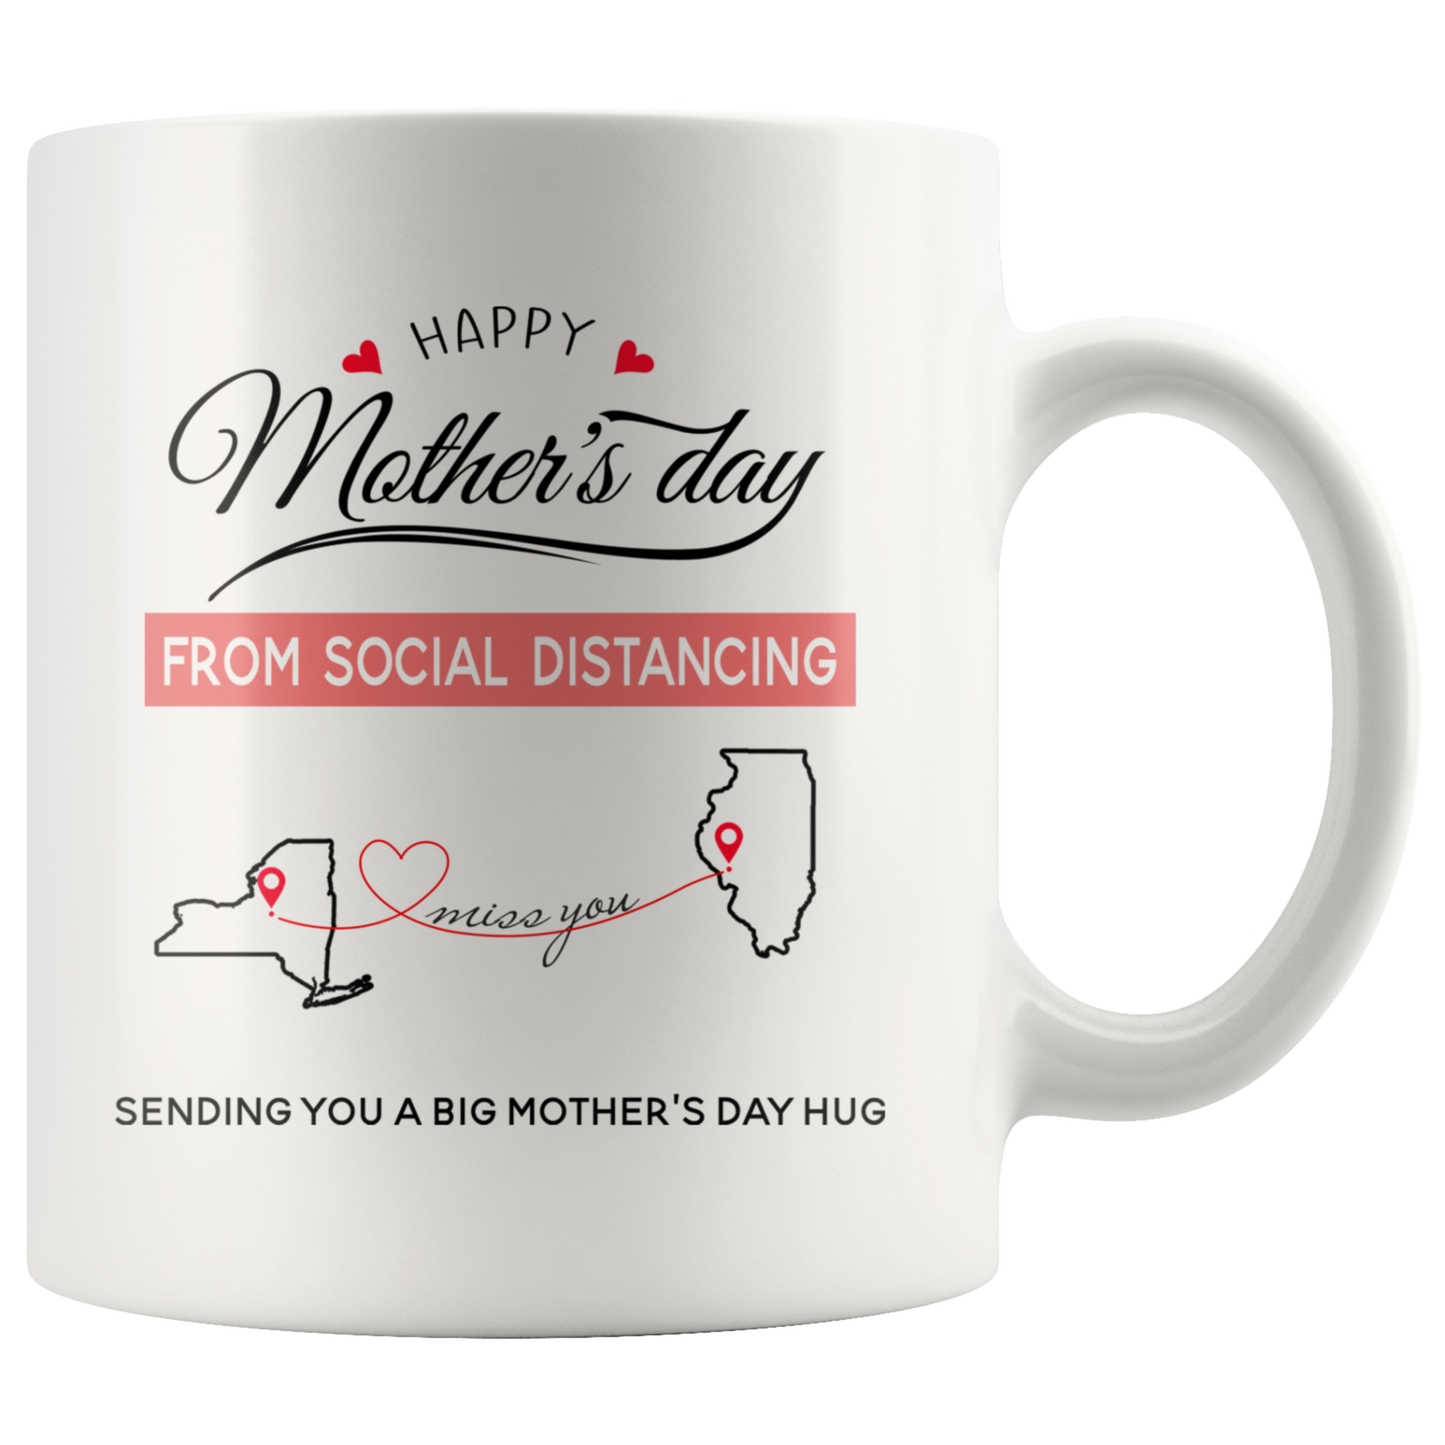 ND-21436139-sp-26961 - [ New York | Illinois ] (CC_Accent_Mug_) Happy Mothers Day From Social Distancing, Sending You A Big